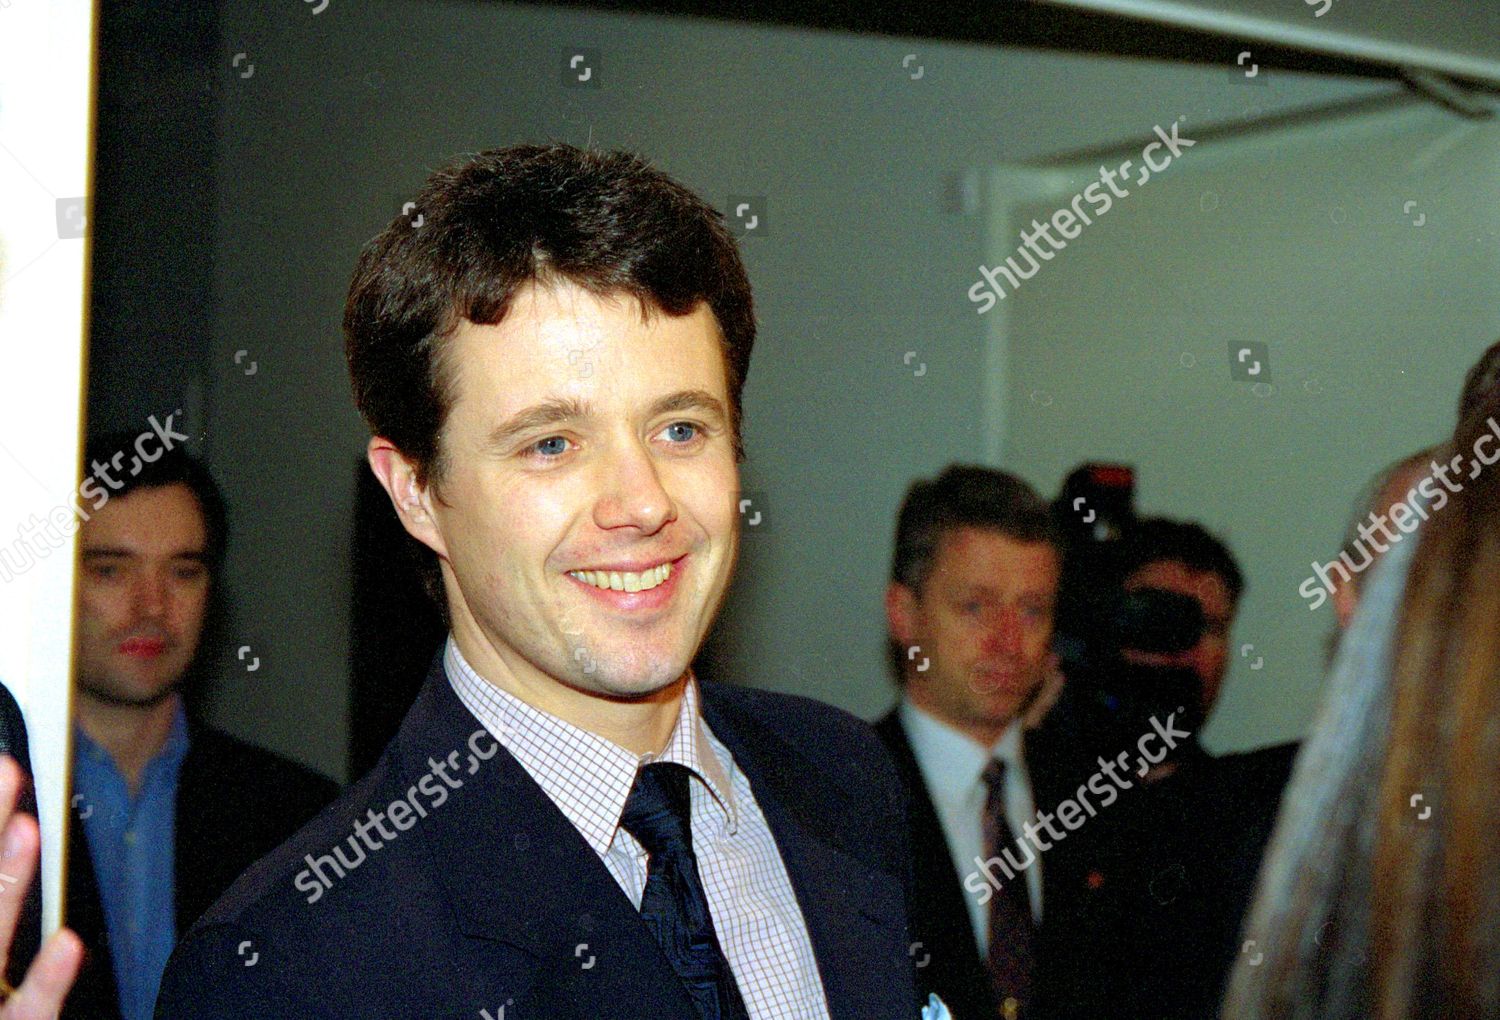 crown-prince-frederik-opening-the-never-green-and-ever-green-exhibition-denmark-shutterstock-editorial-376829h.jpg